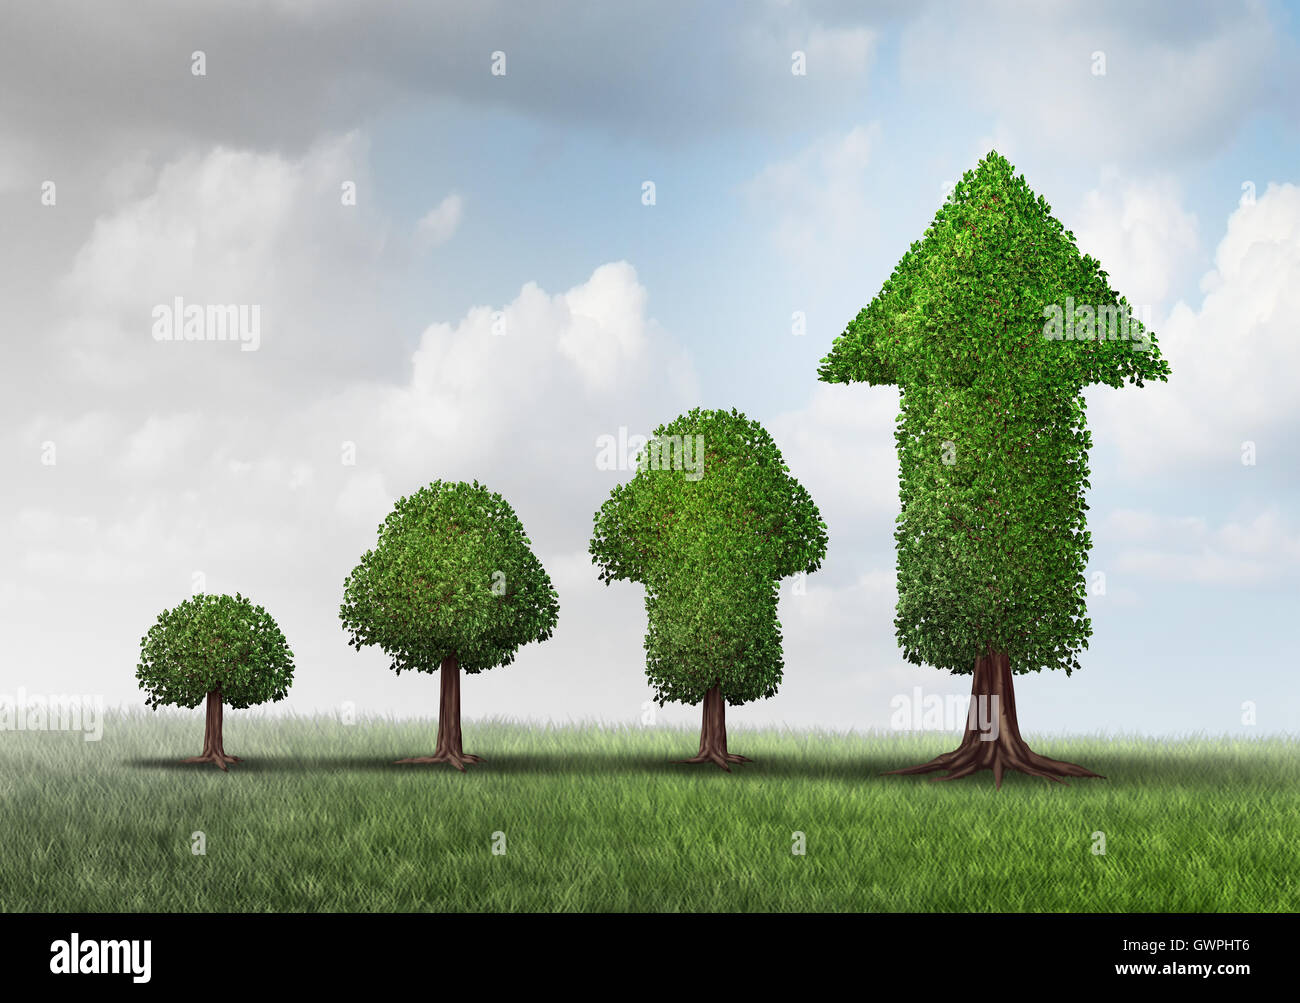 Concept of growing success as a group of trees developing from a small start to a successful finnish as a tree shaped as an arrow with 3D illustration elements as a business metaphor for investment maturity. Stock Photo